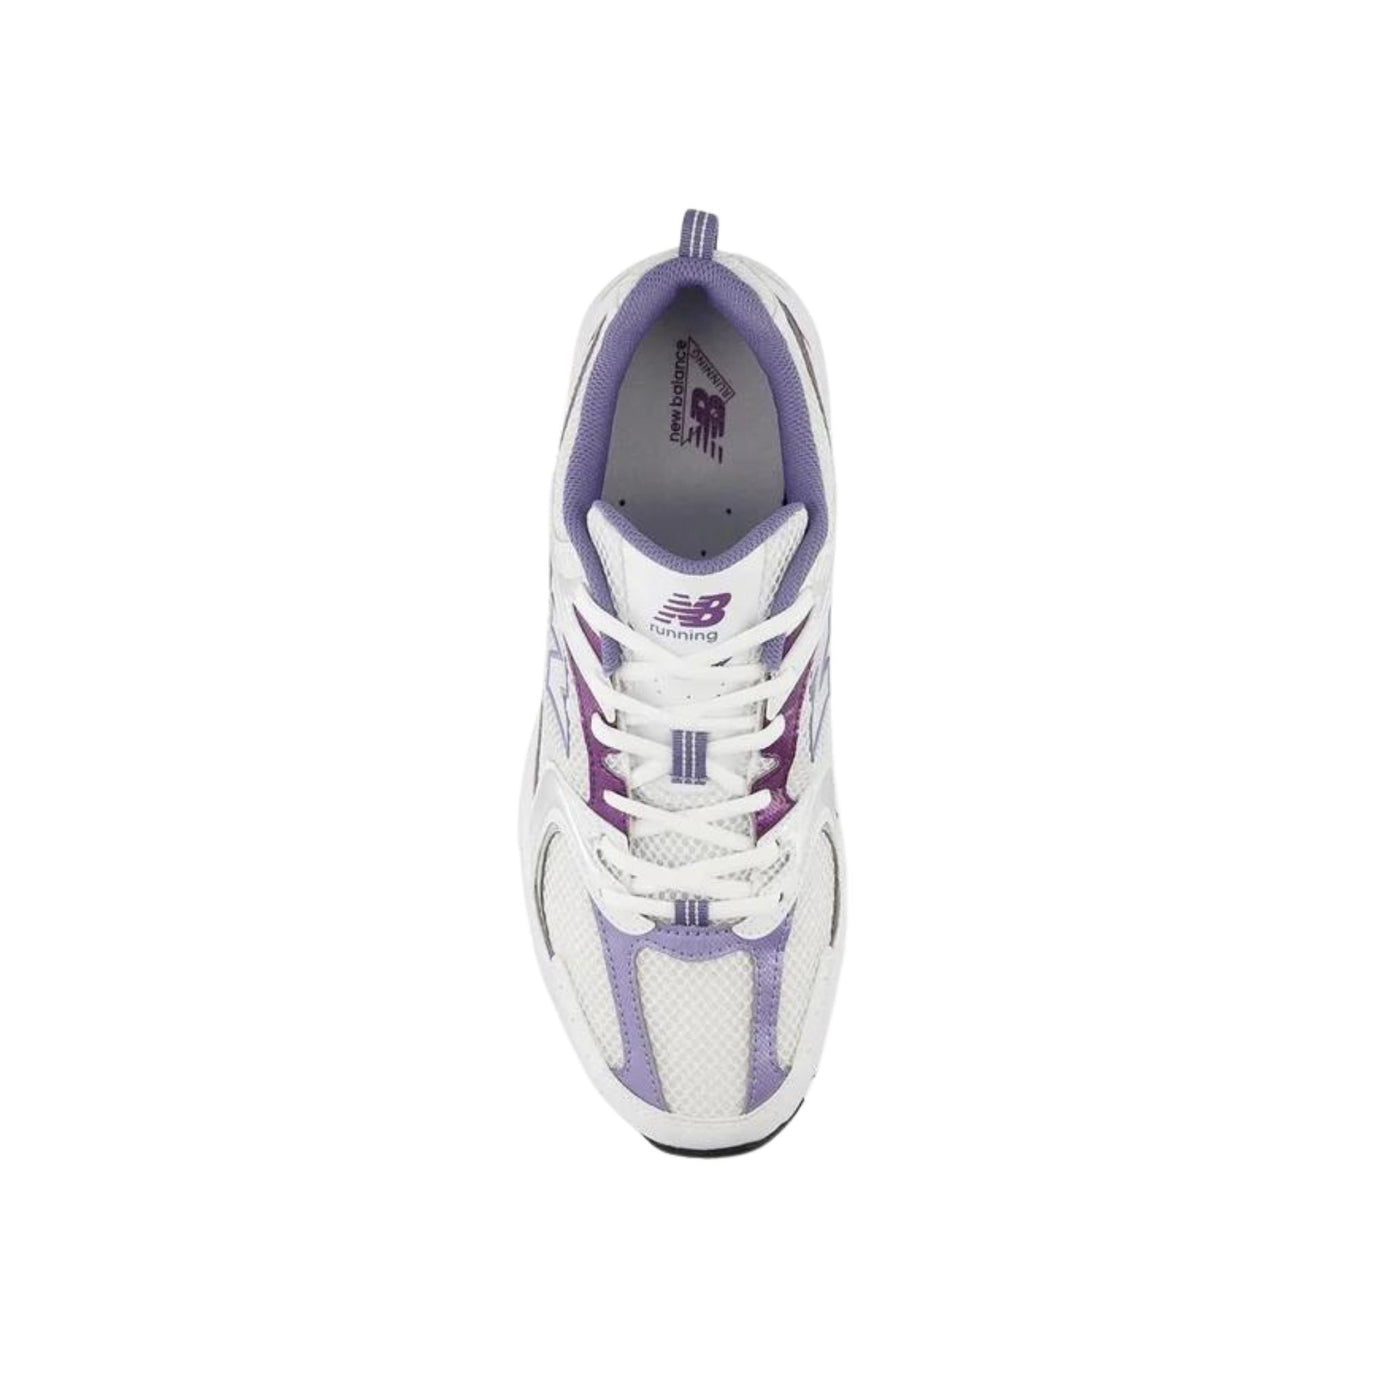 Unisex 530 sneakers with purple details